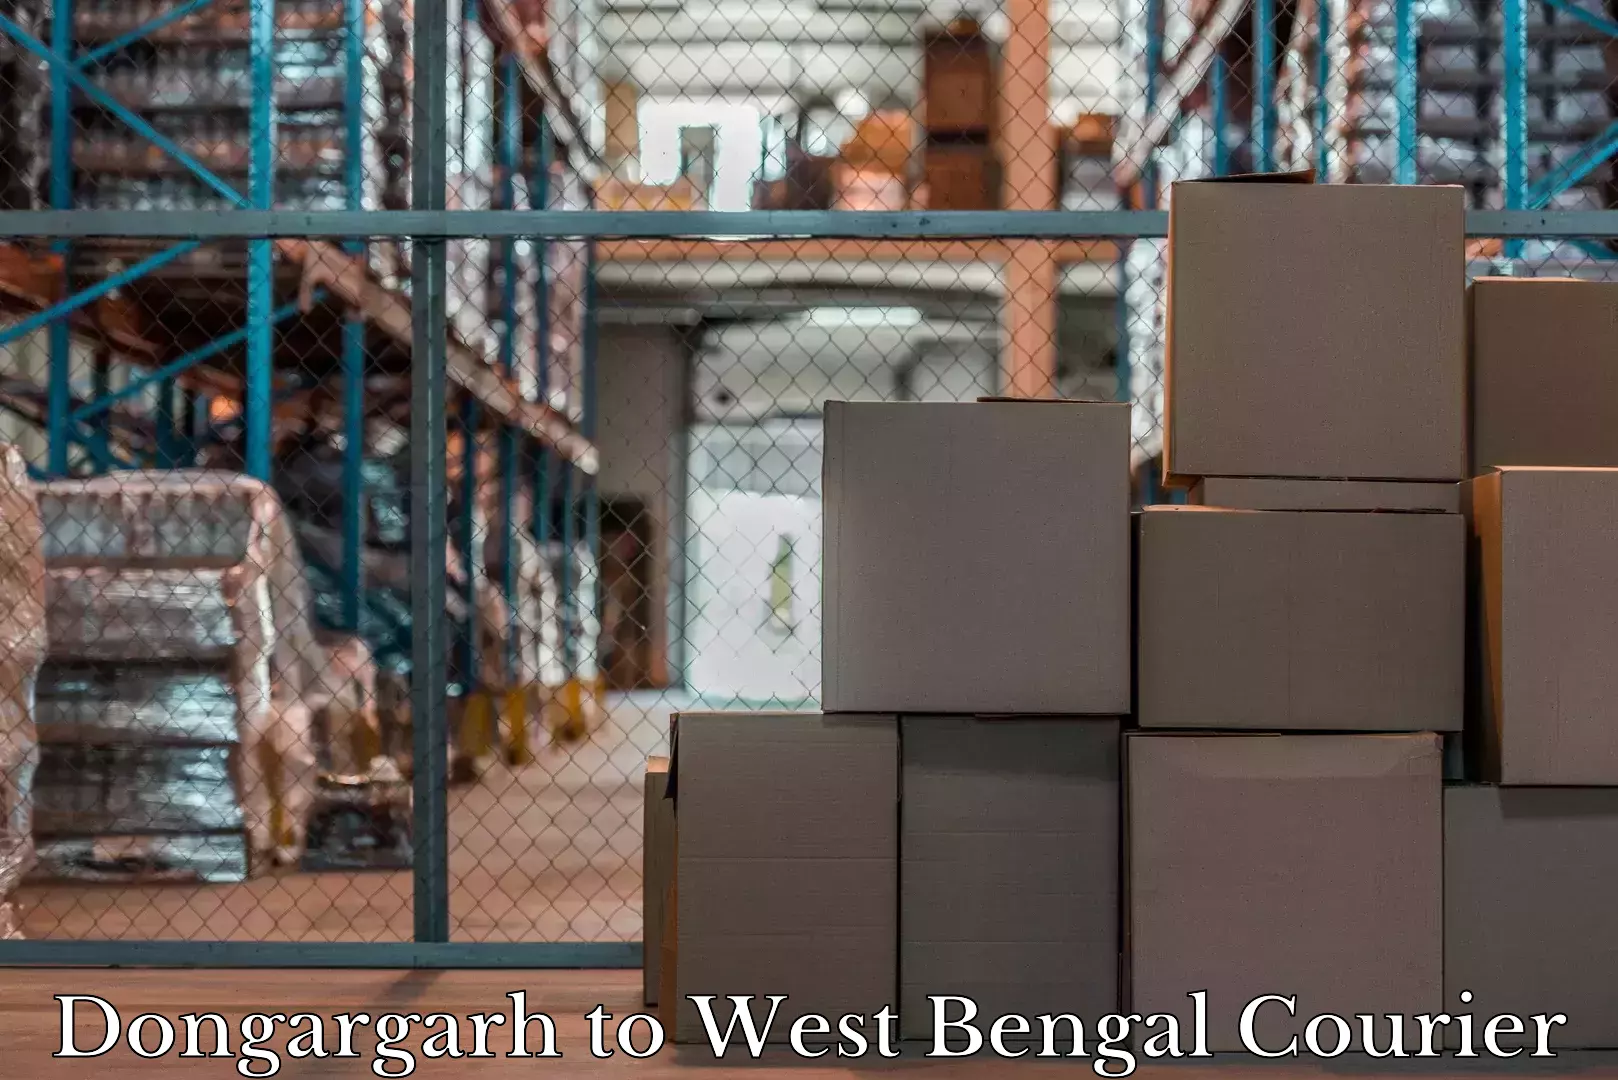 Baggage relocation service Dongargarh to West Bengal